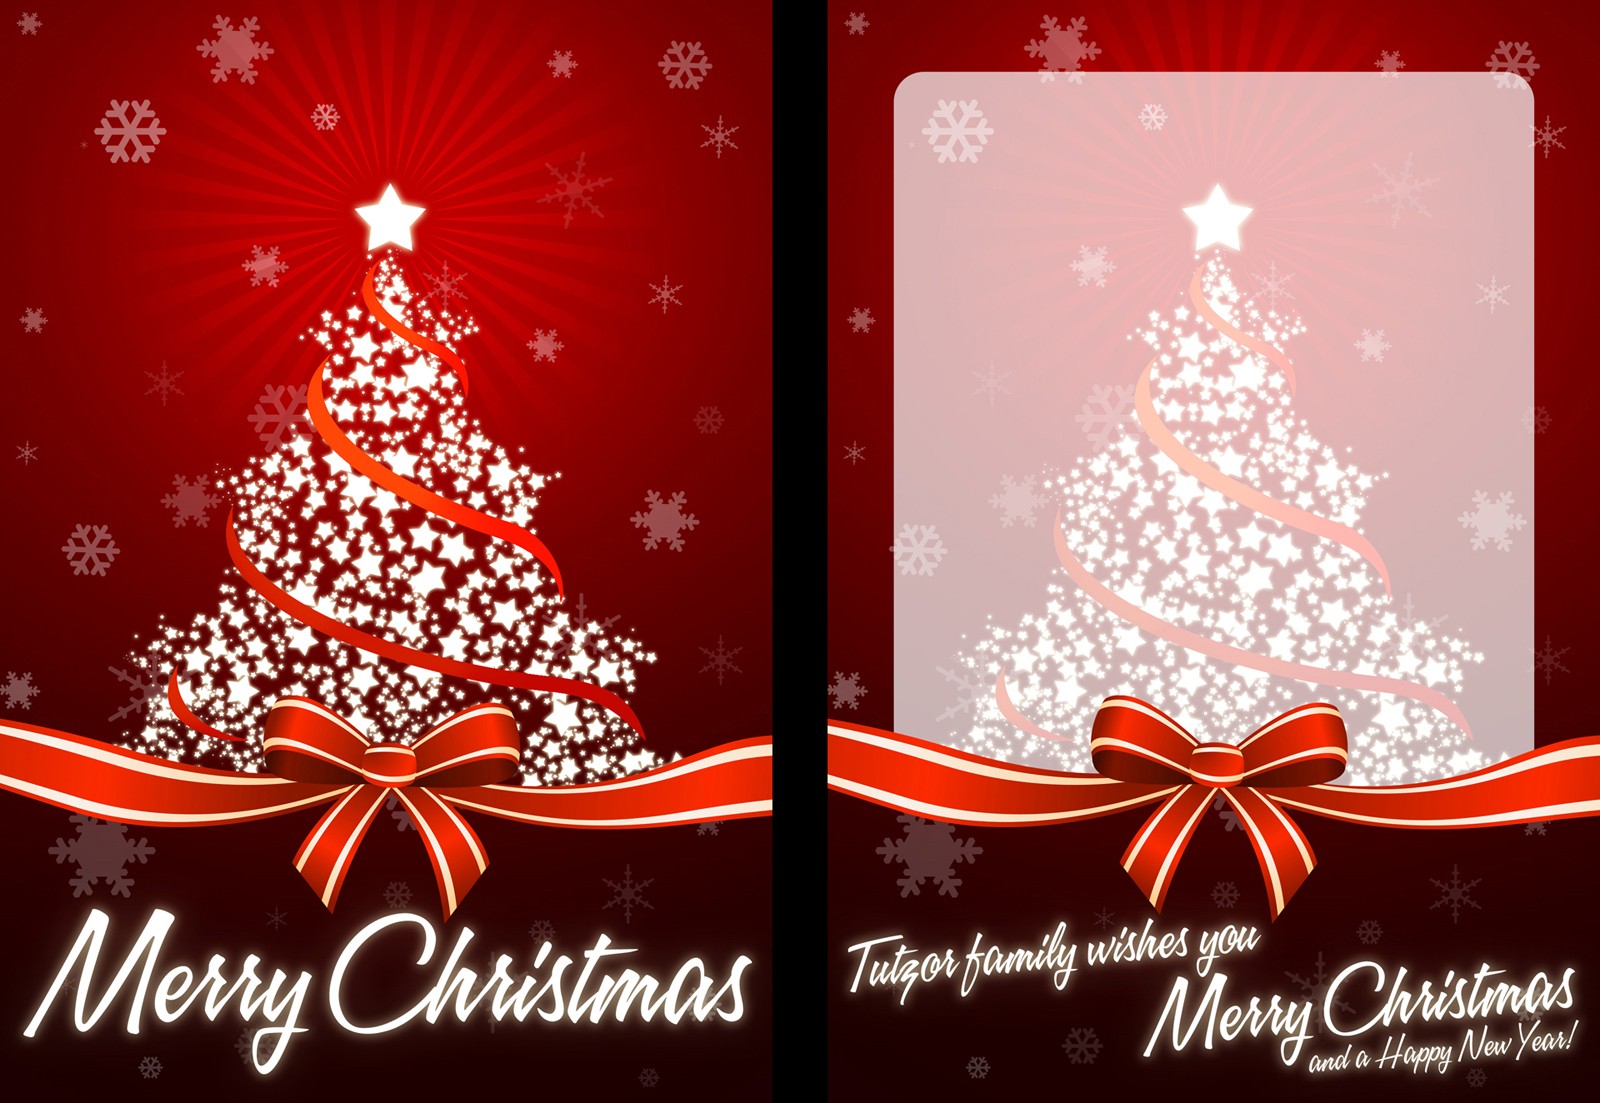 How To Create Your Own Christmas Card Ready For Print Tutzor Psd